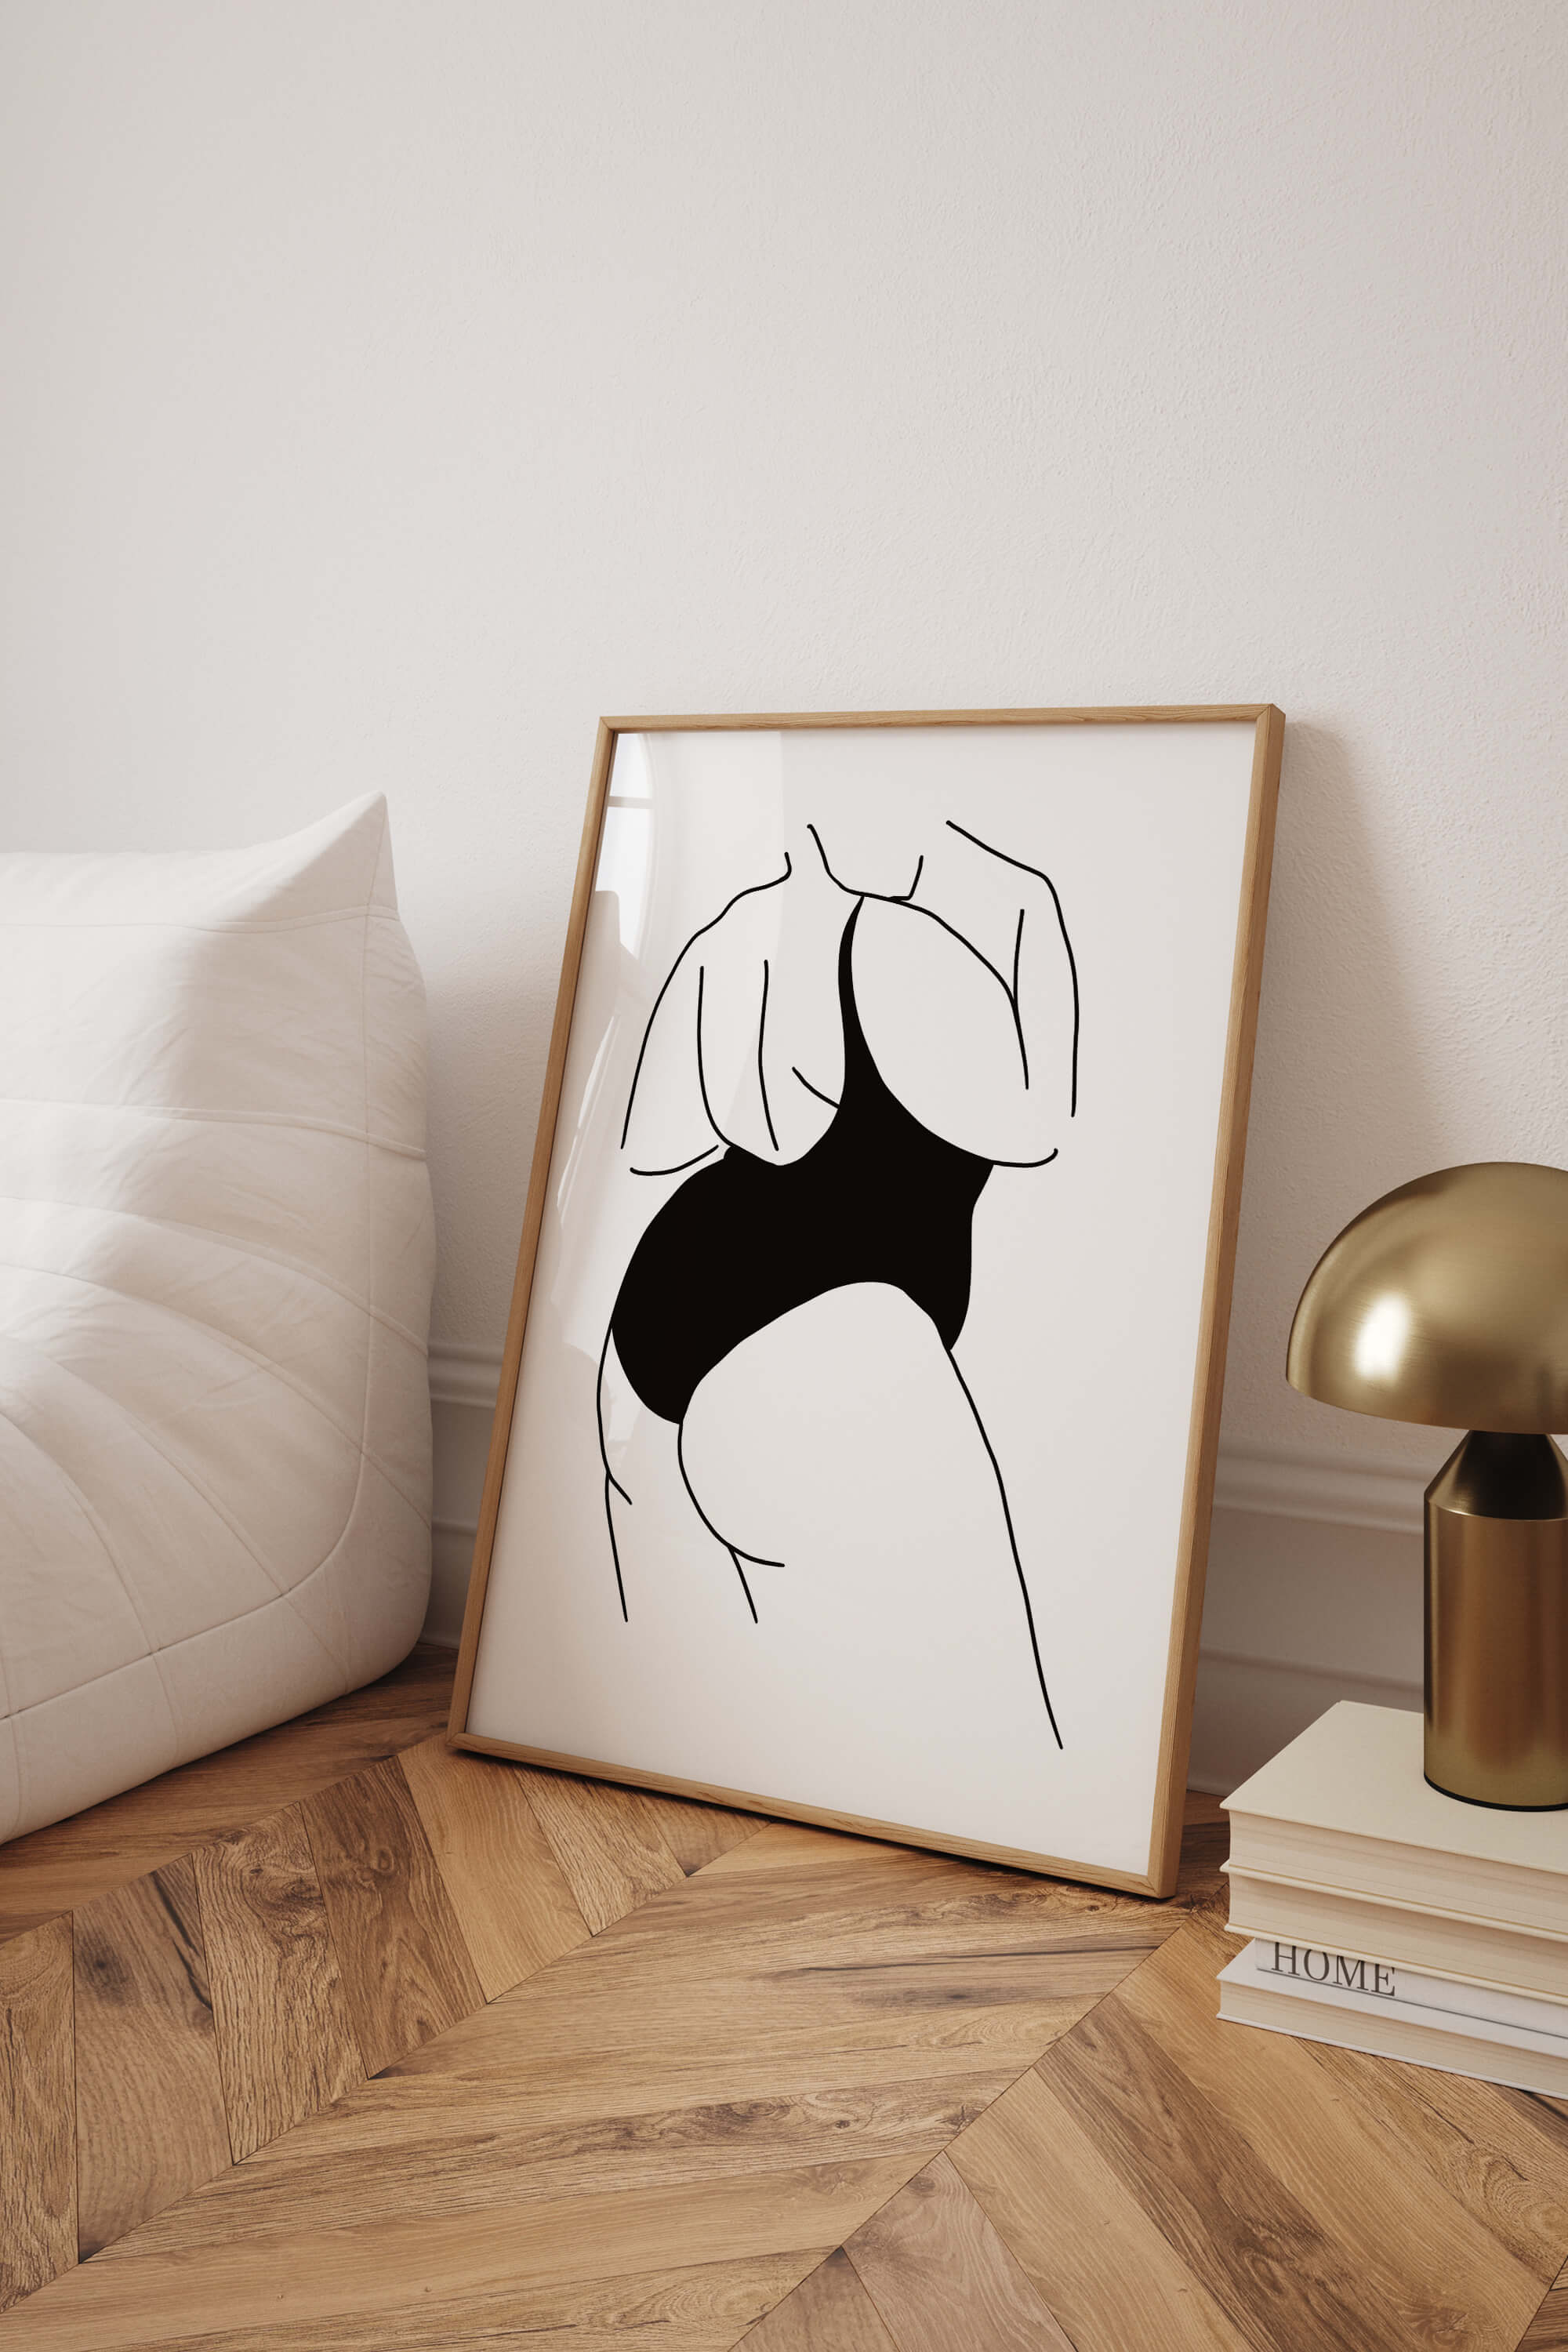 A confident, curated environment awaits. Celebrate your curves with empowered elegance. Take the next step and add this art to your cart now.